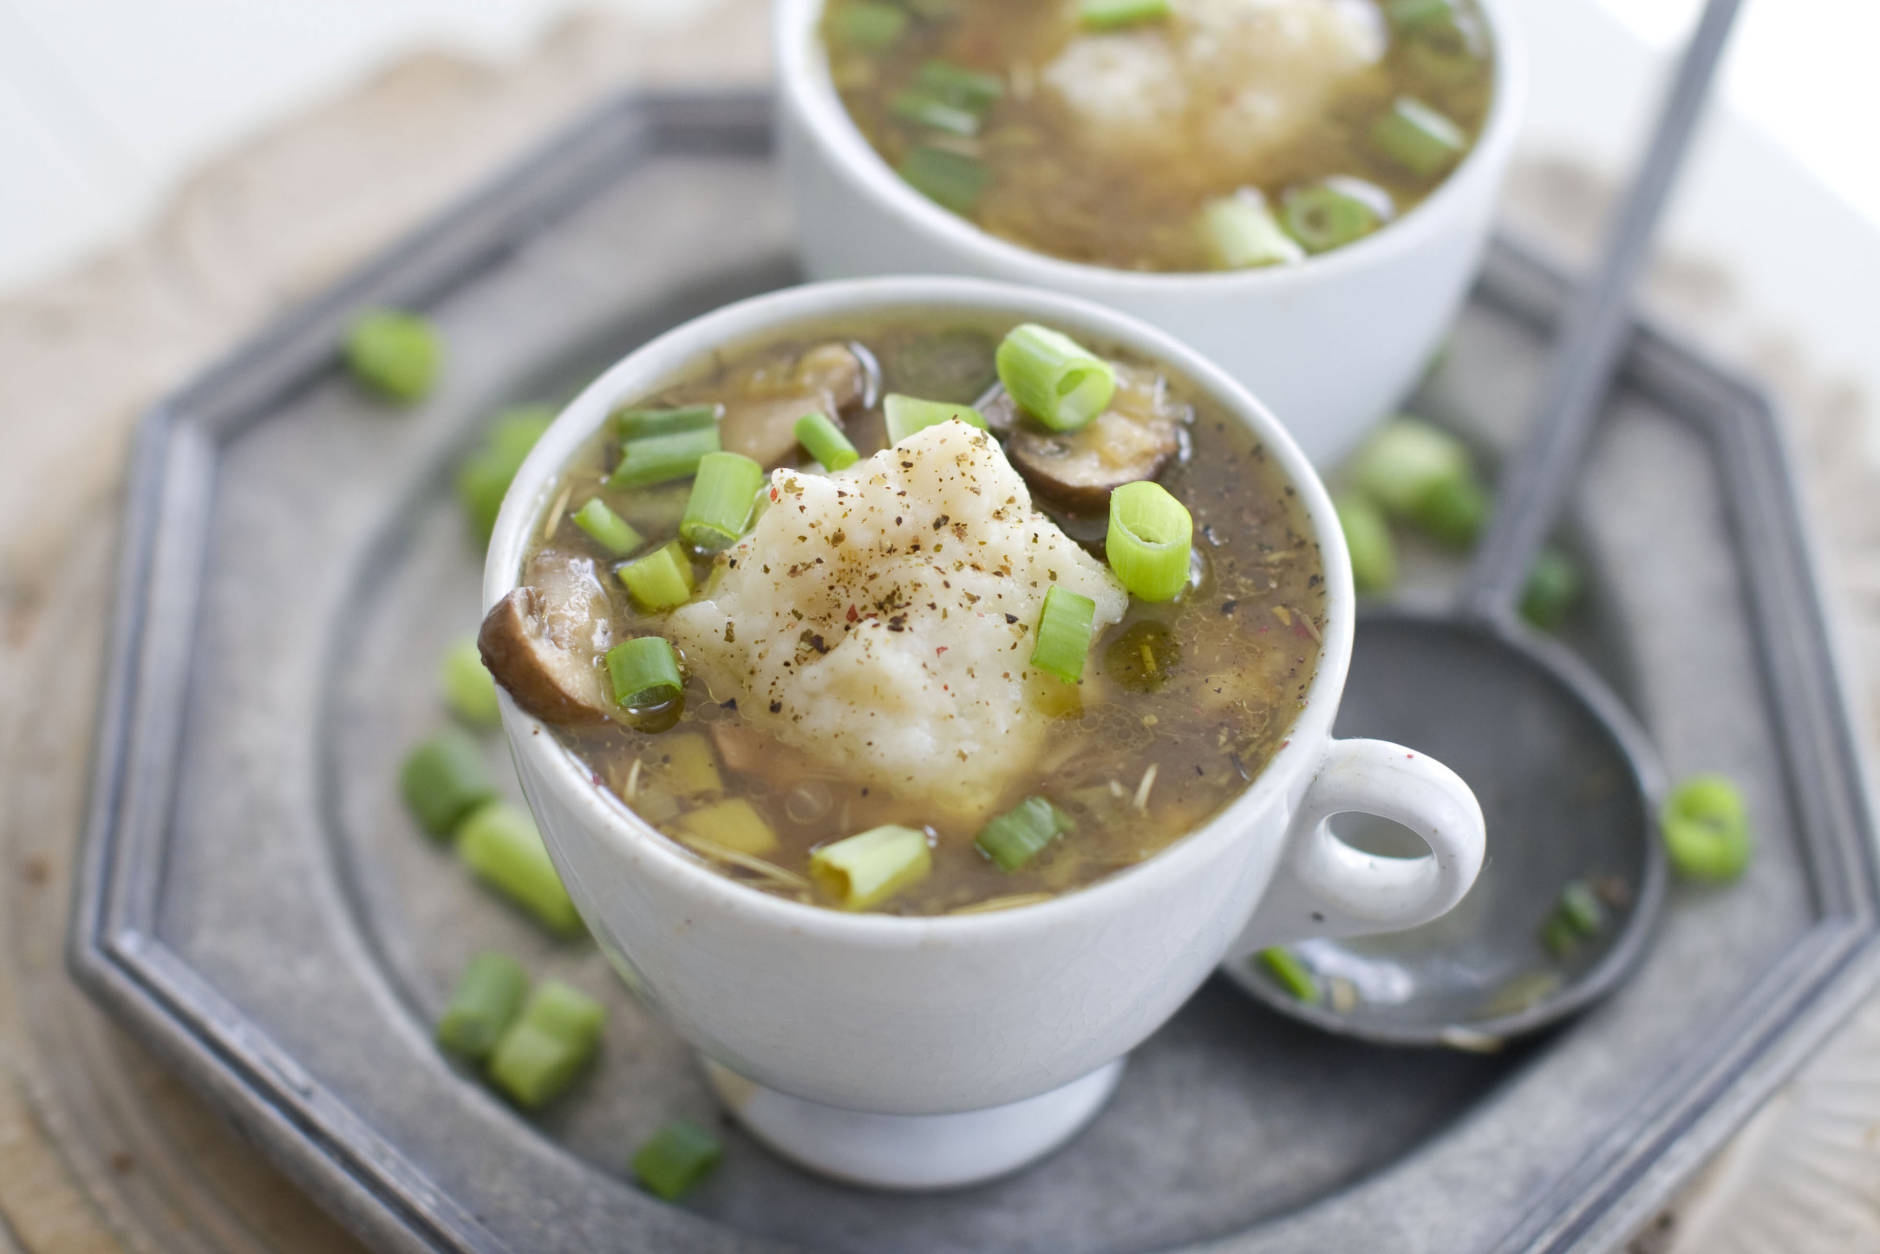 In this image taken on Sept. 17, 2012, cups of Mushroom and Chicken Barley Soup with Parmesan Dumplings are shown in Concord, N.H. (AP Photo/Matthew Mead)